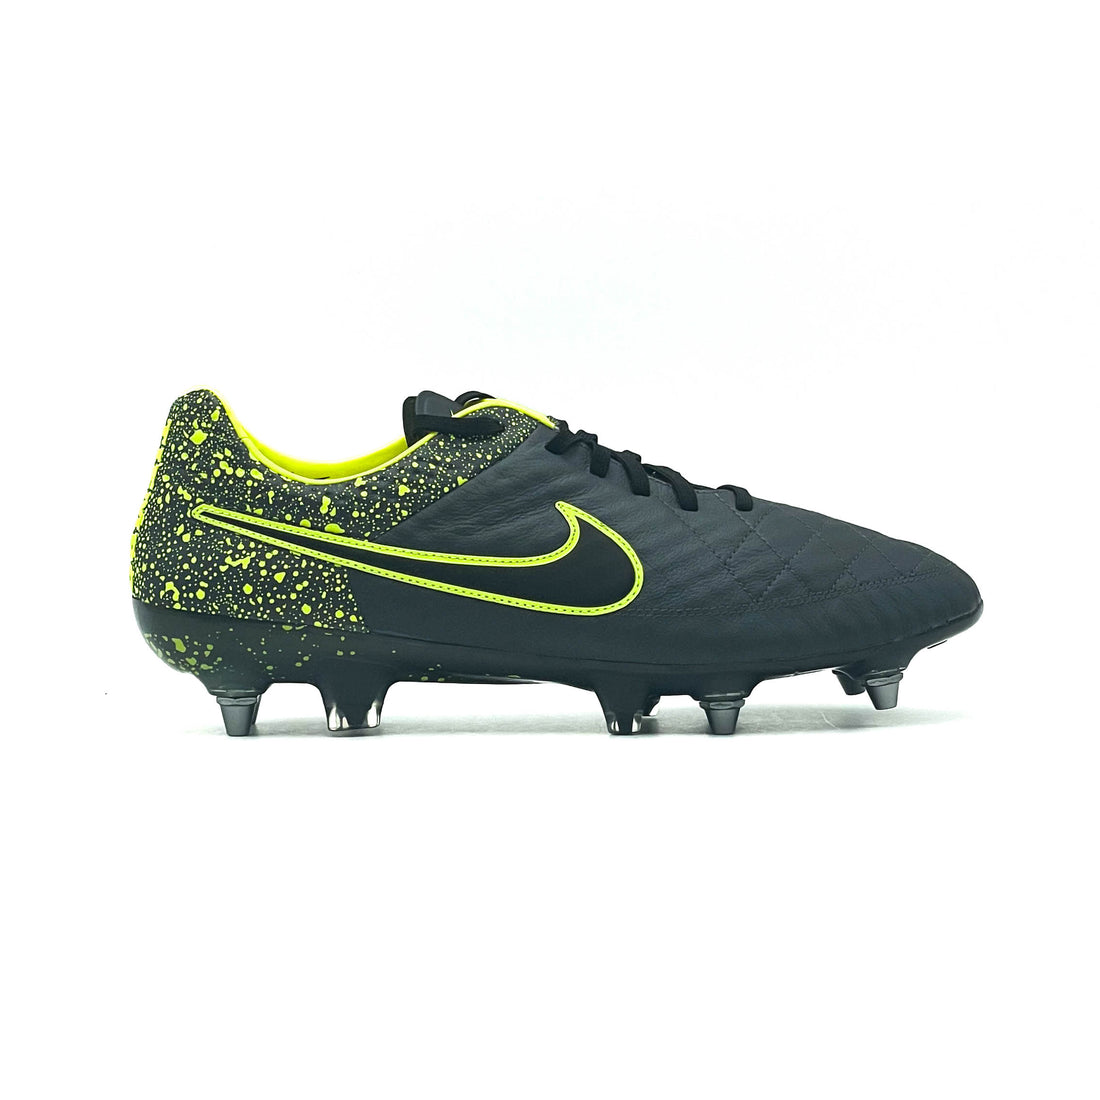 Nike Boot Guide - Find the perfect Nike Boot for your type of playing